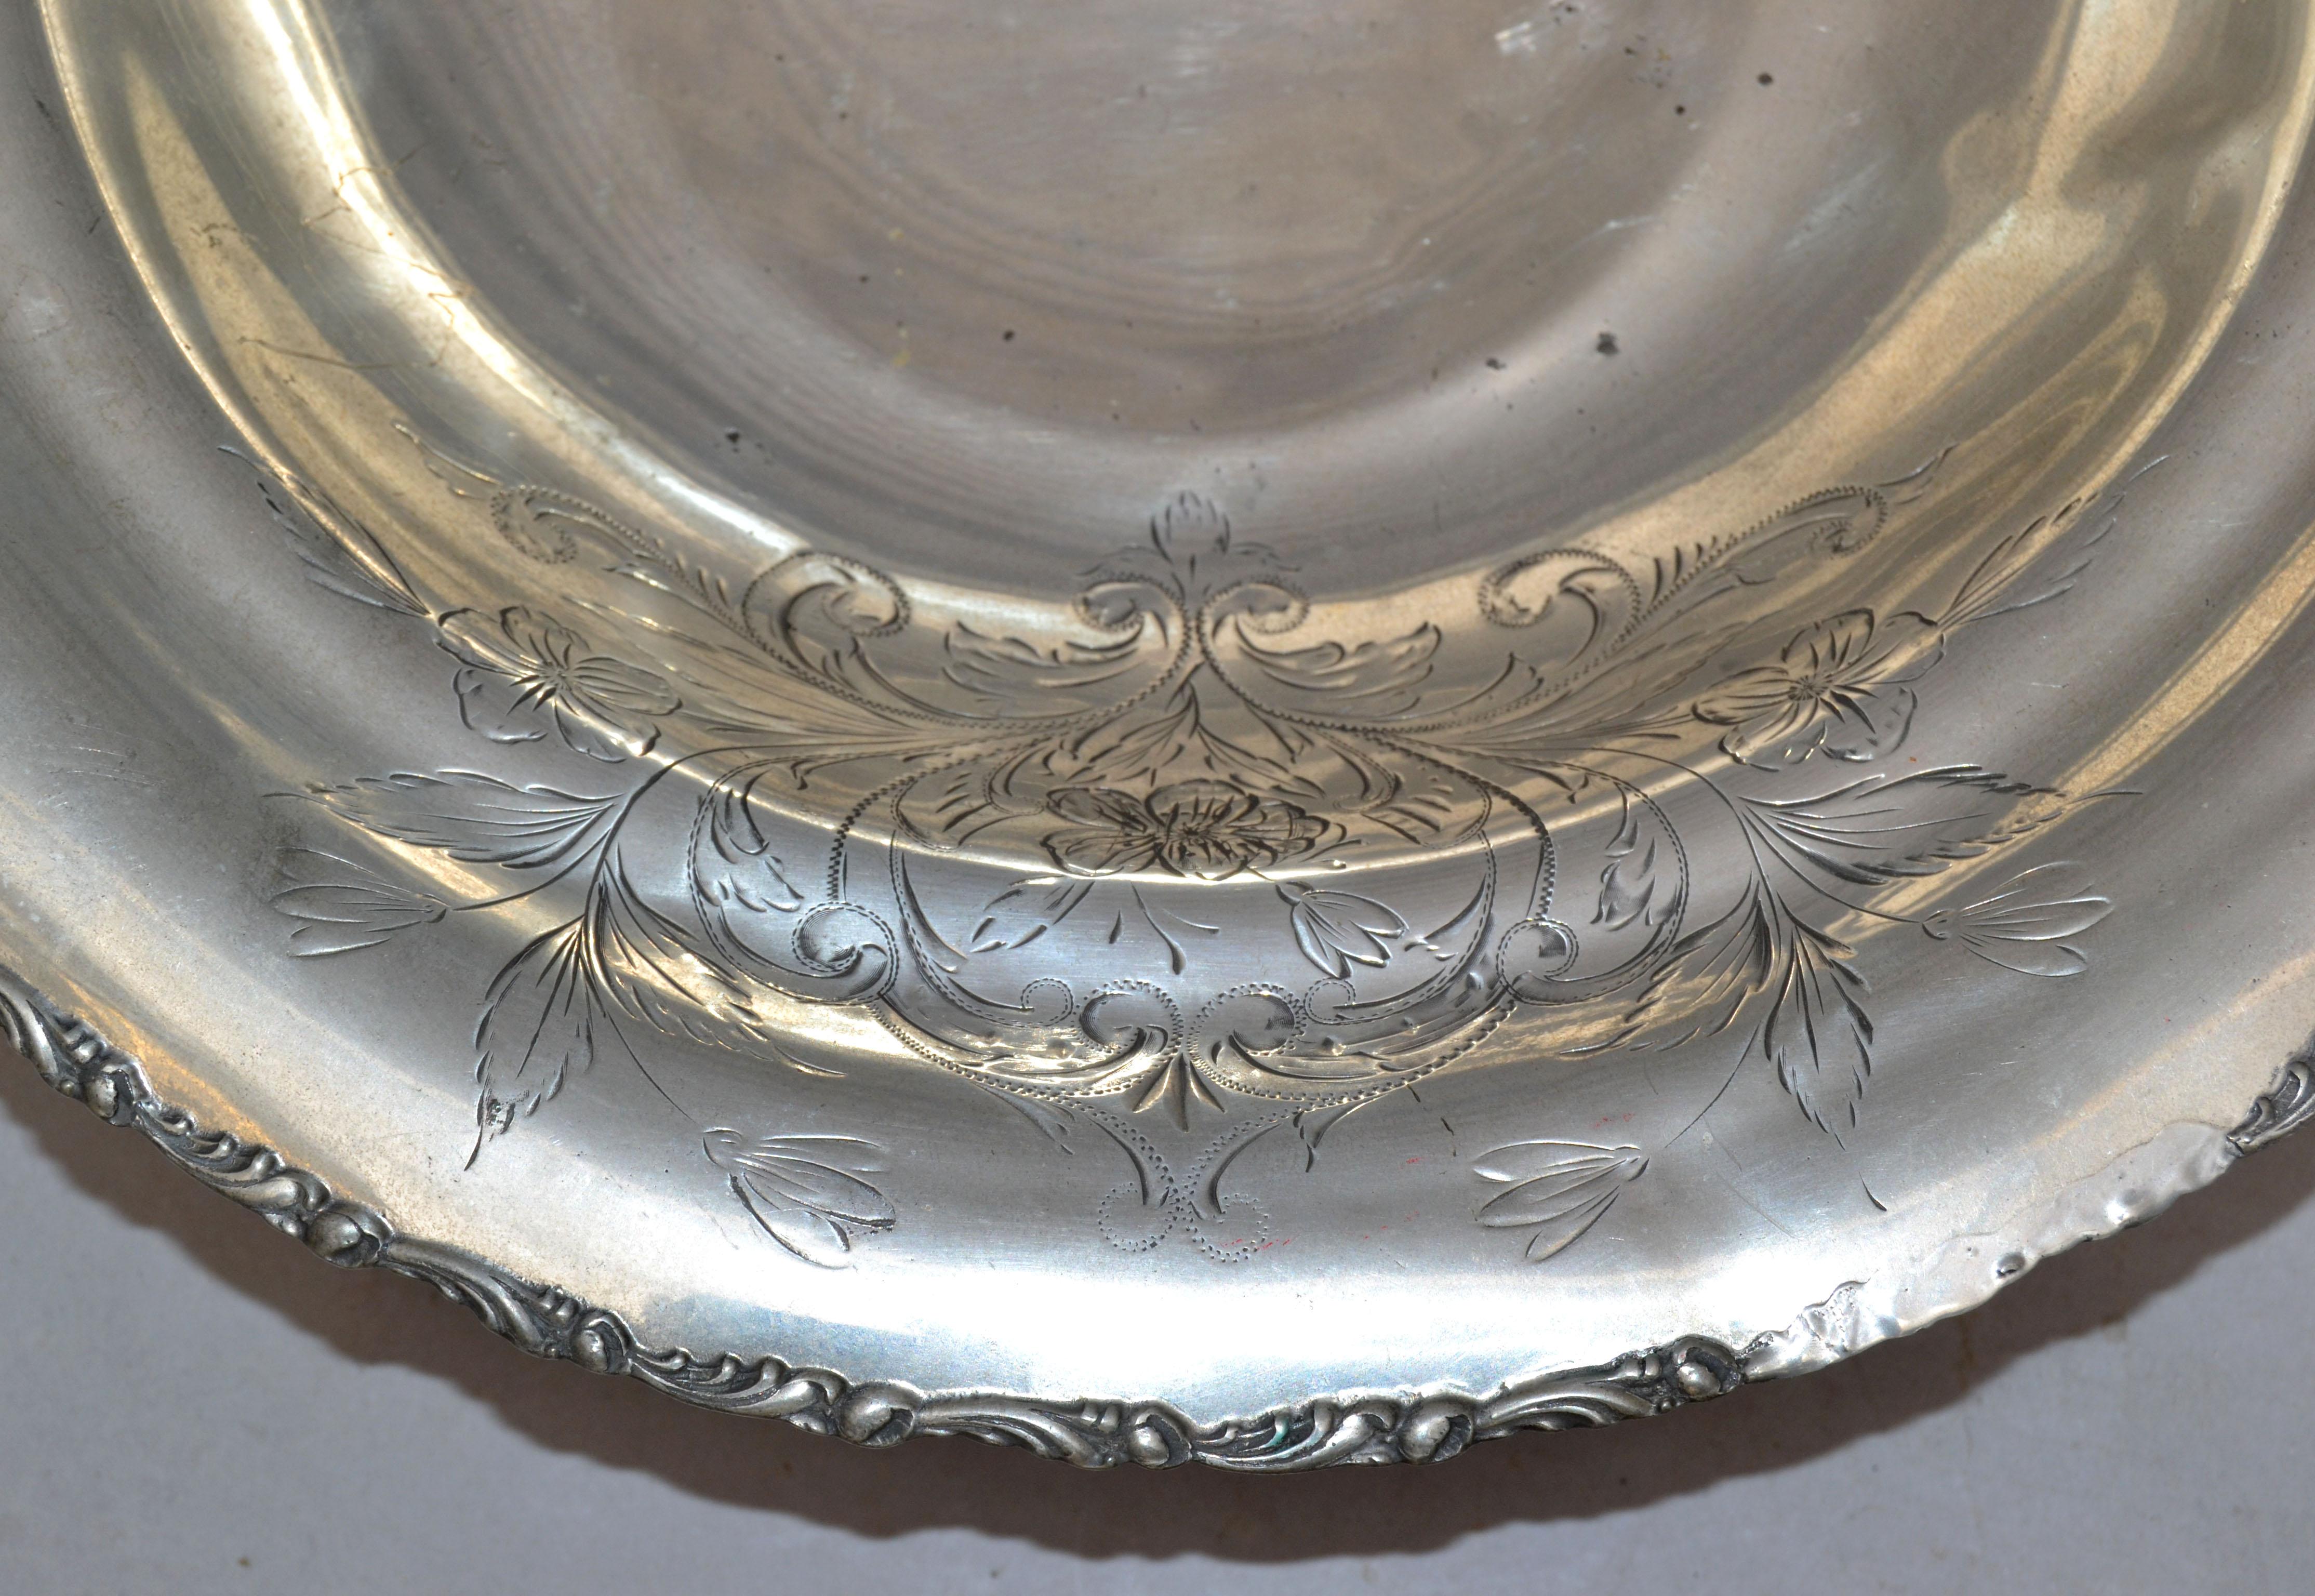 Georgian English Silver Plate Trademark Ornate Large Bowl Footed Serving Dish Punch Bowl For Sale